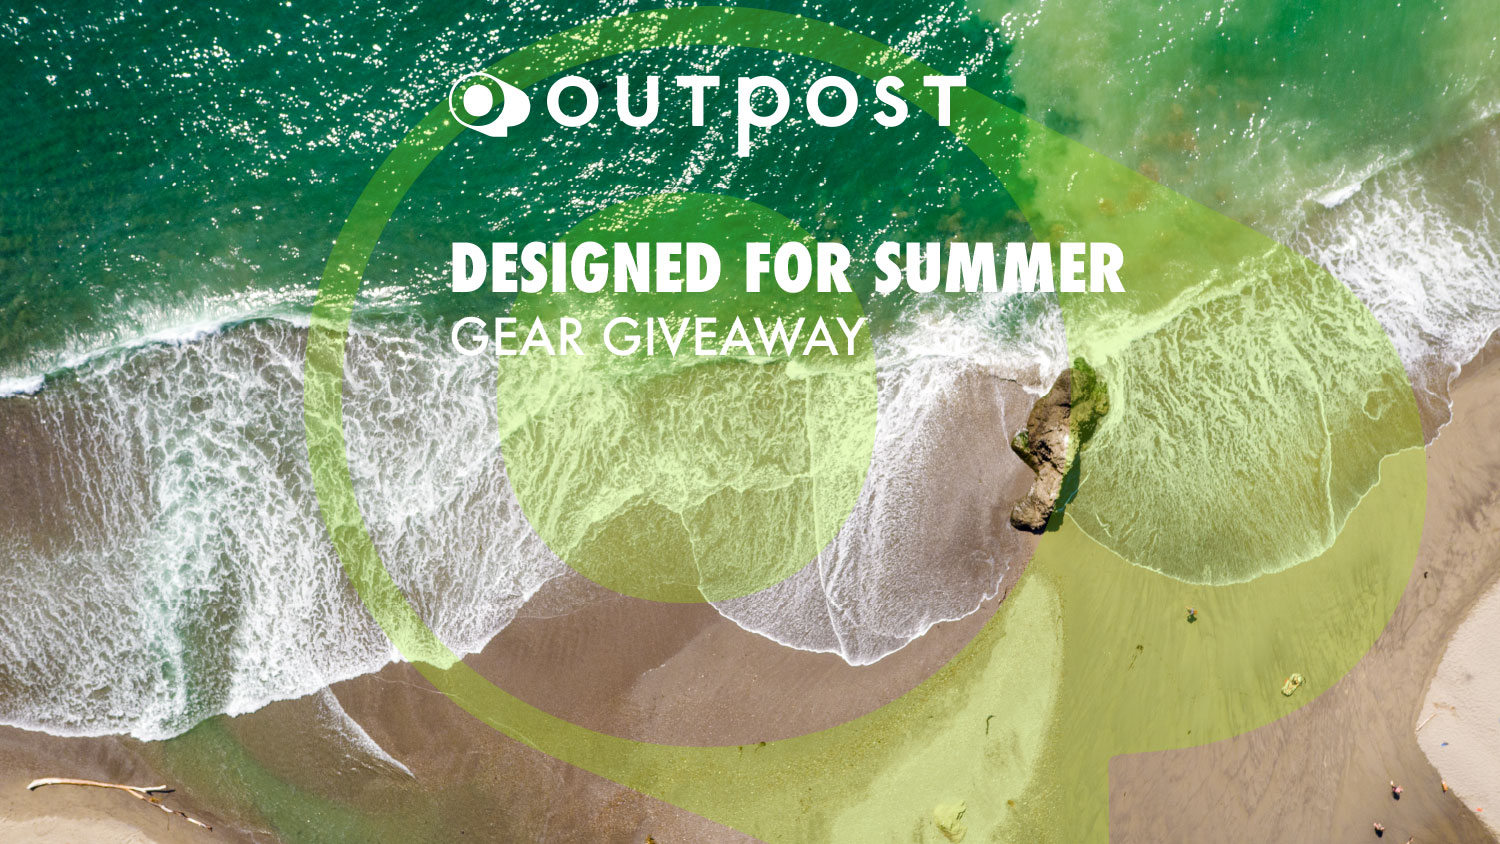 Designed For Summer Giveaway | The Outpost